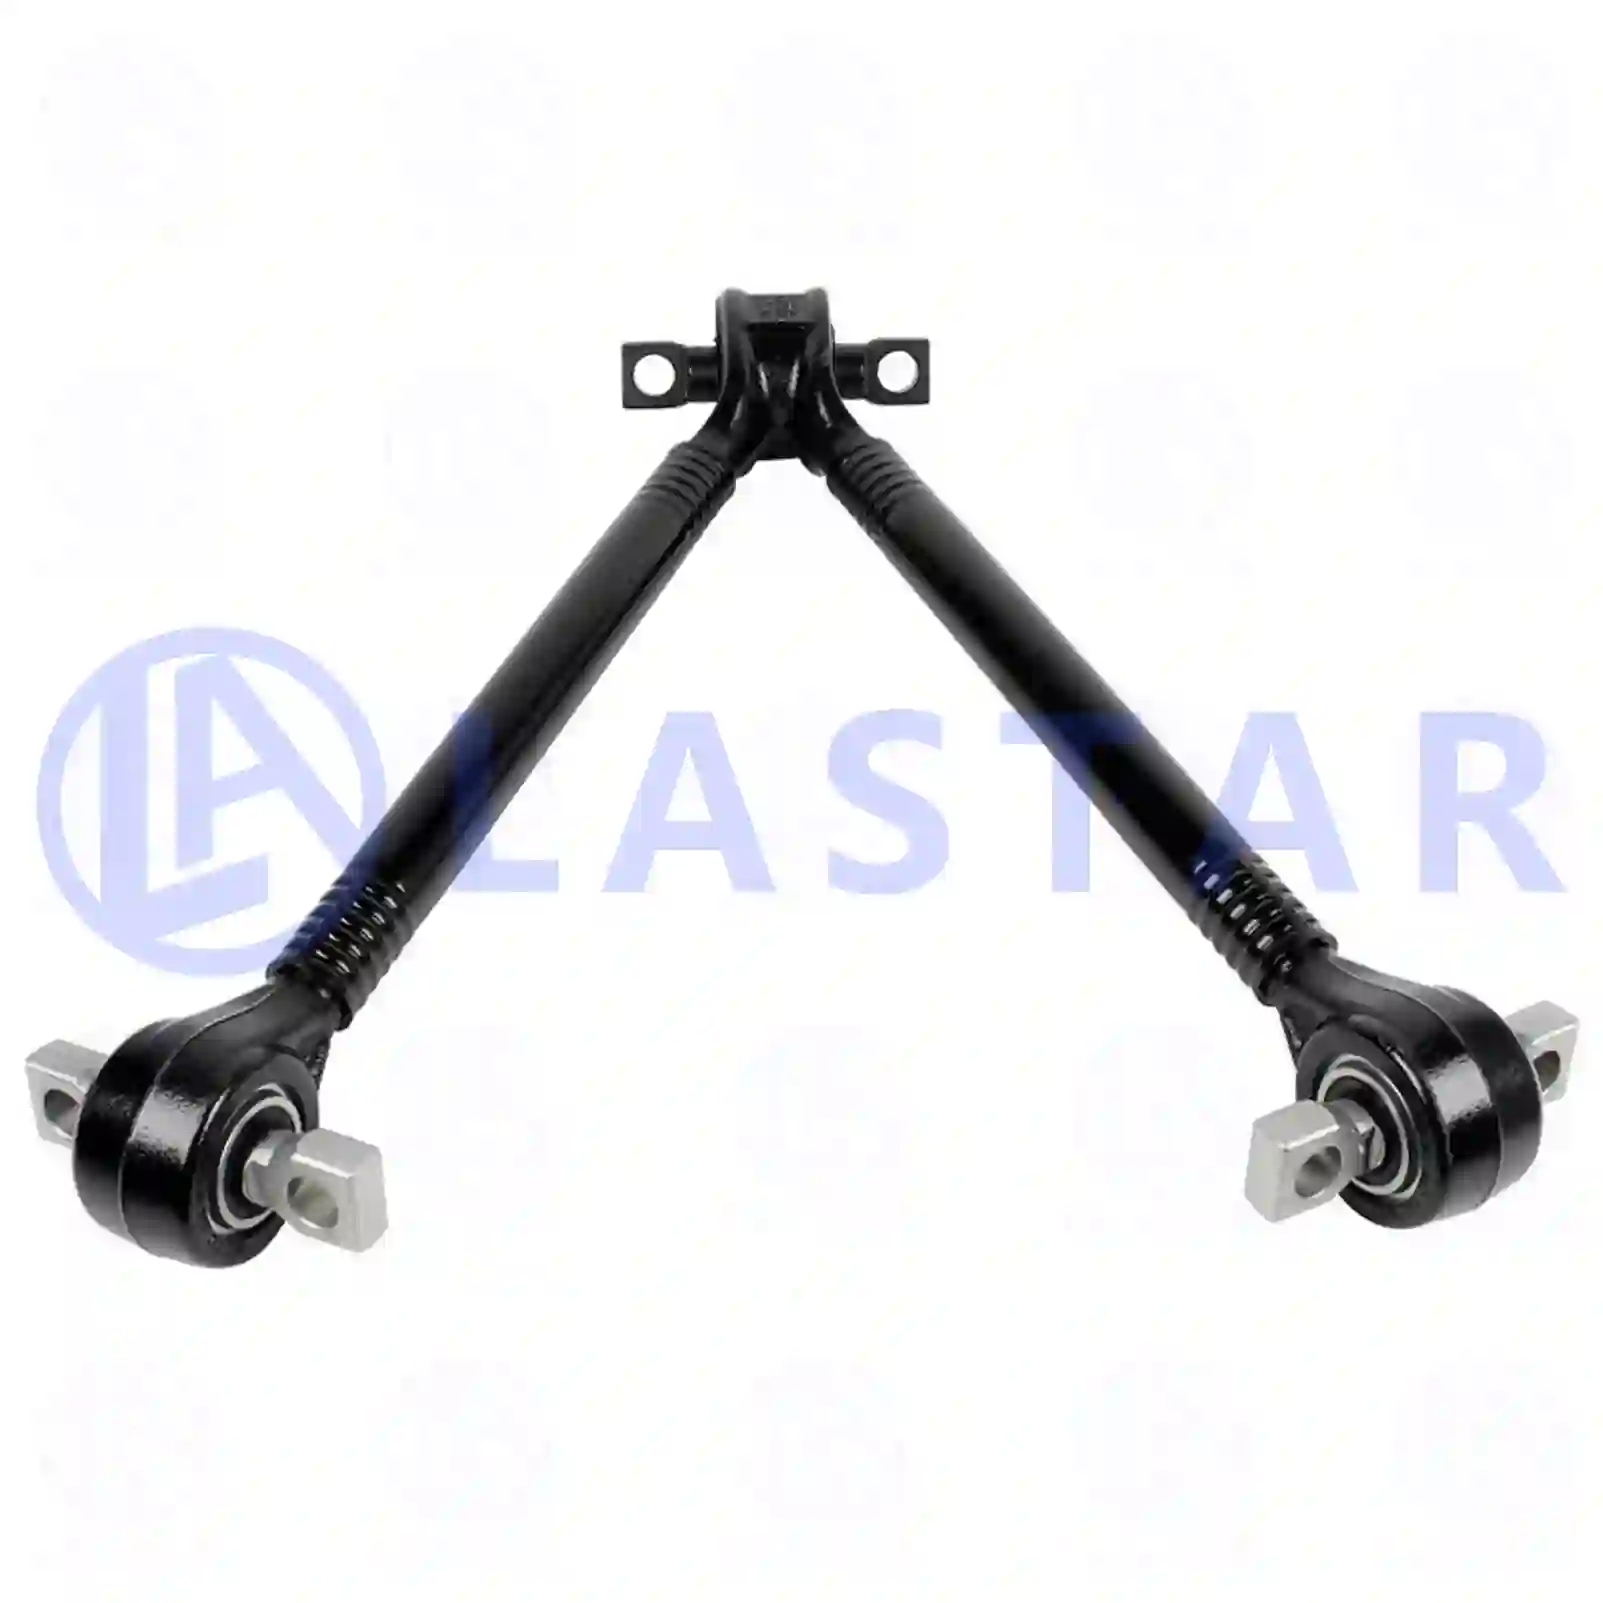 V-stay, 77727156, 9443500405, , , , , , , ||  77727156 Lastar Spare Part | Truck Spare Parts, Auotomotive Spare Parts V-stay, 77727156, 9443500405, , , , , , , ||  77727156 Lastar Spare Part | Truck Spare Parts, Auotomotive Spare Parts